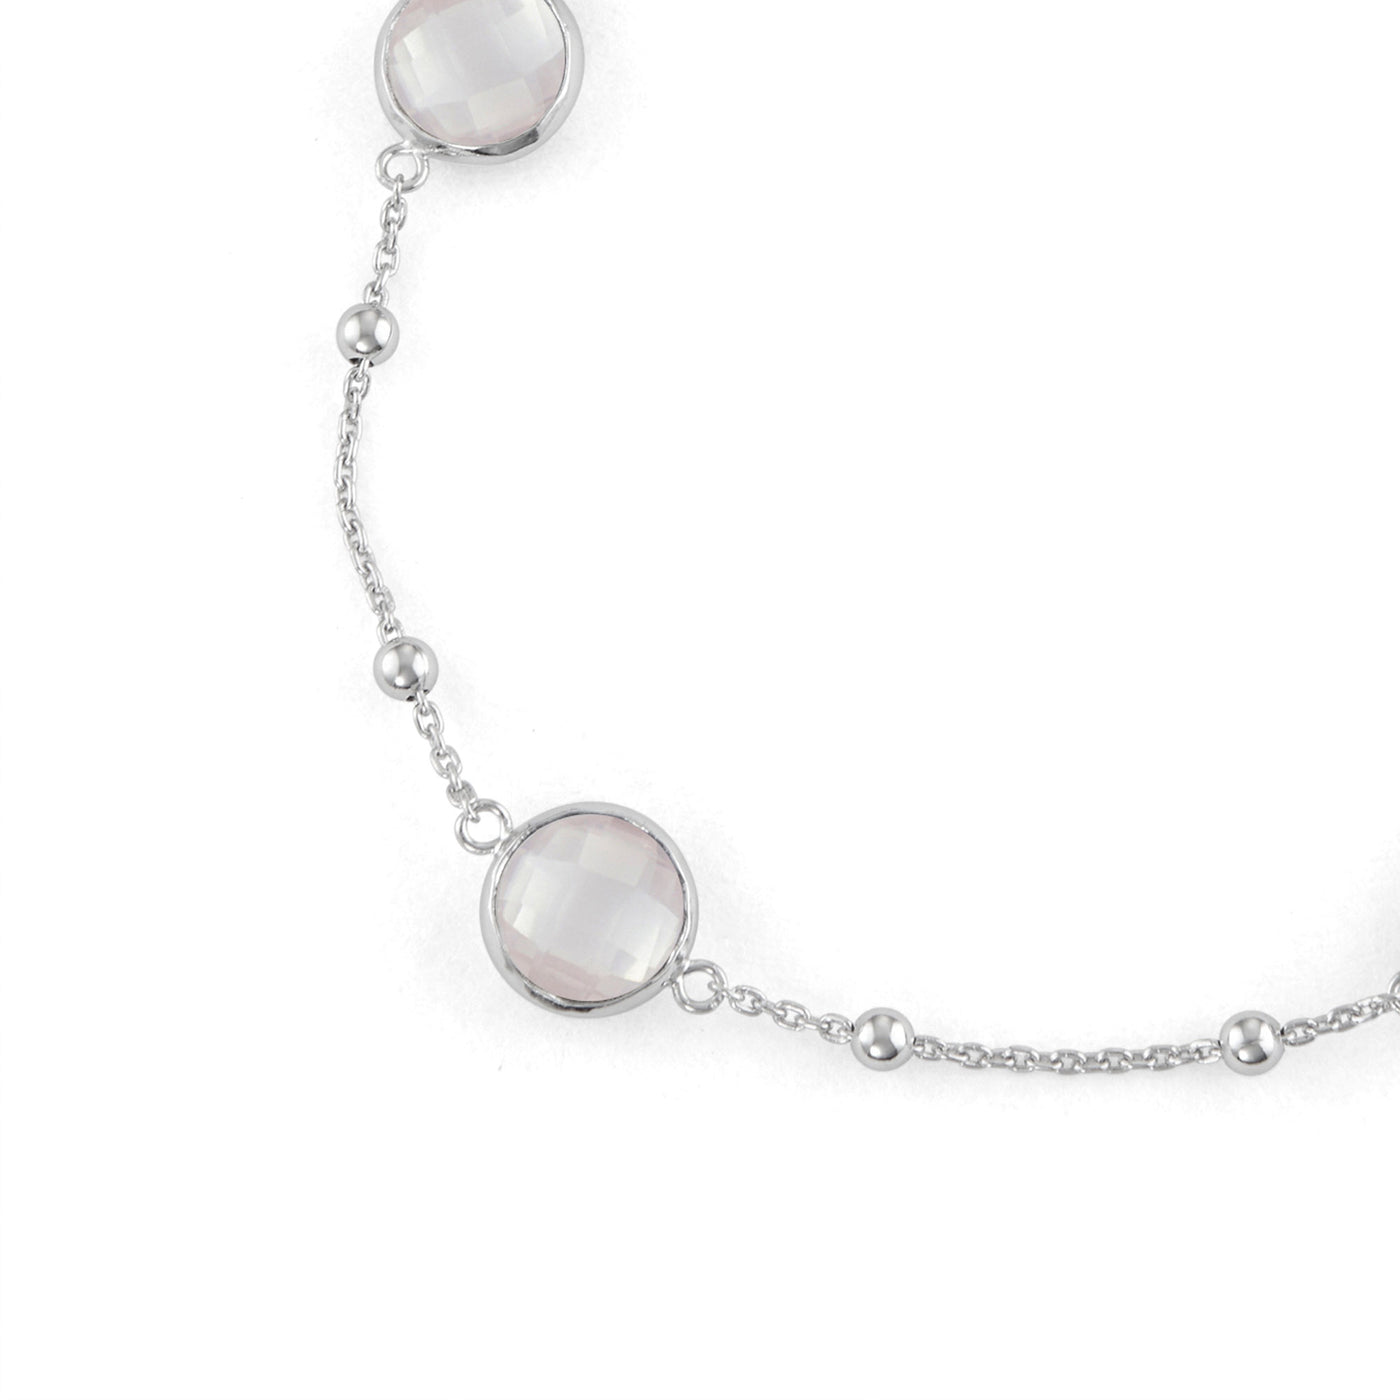 Sterling Silver Bezel Bracelet With Small Silver Stations And Rose Quartz Round Gemstones